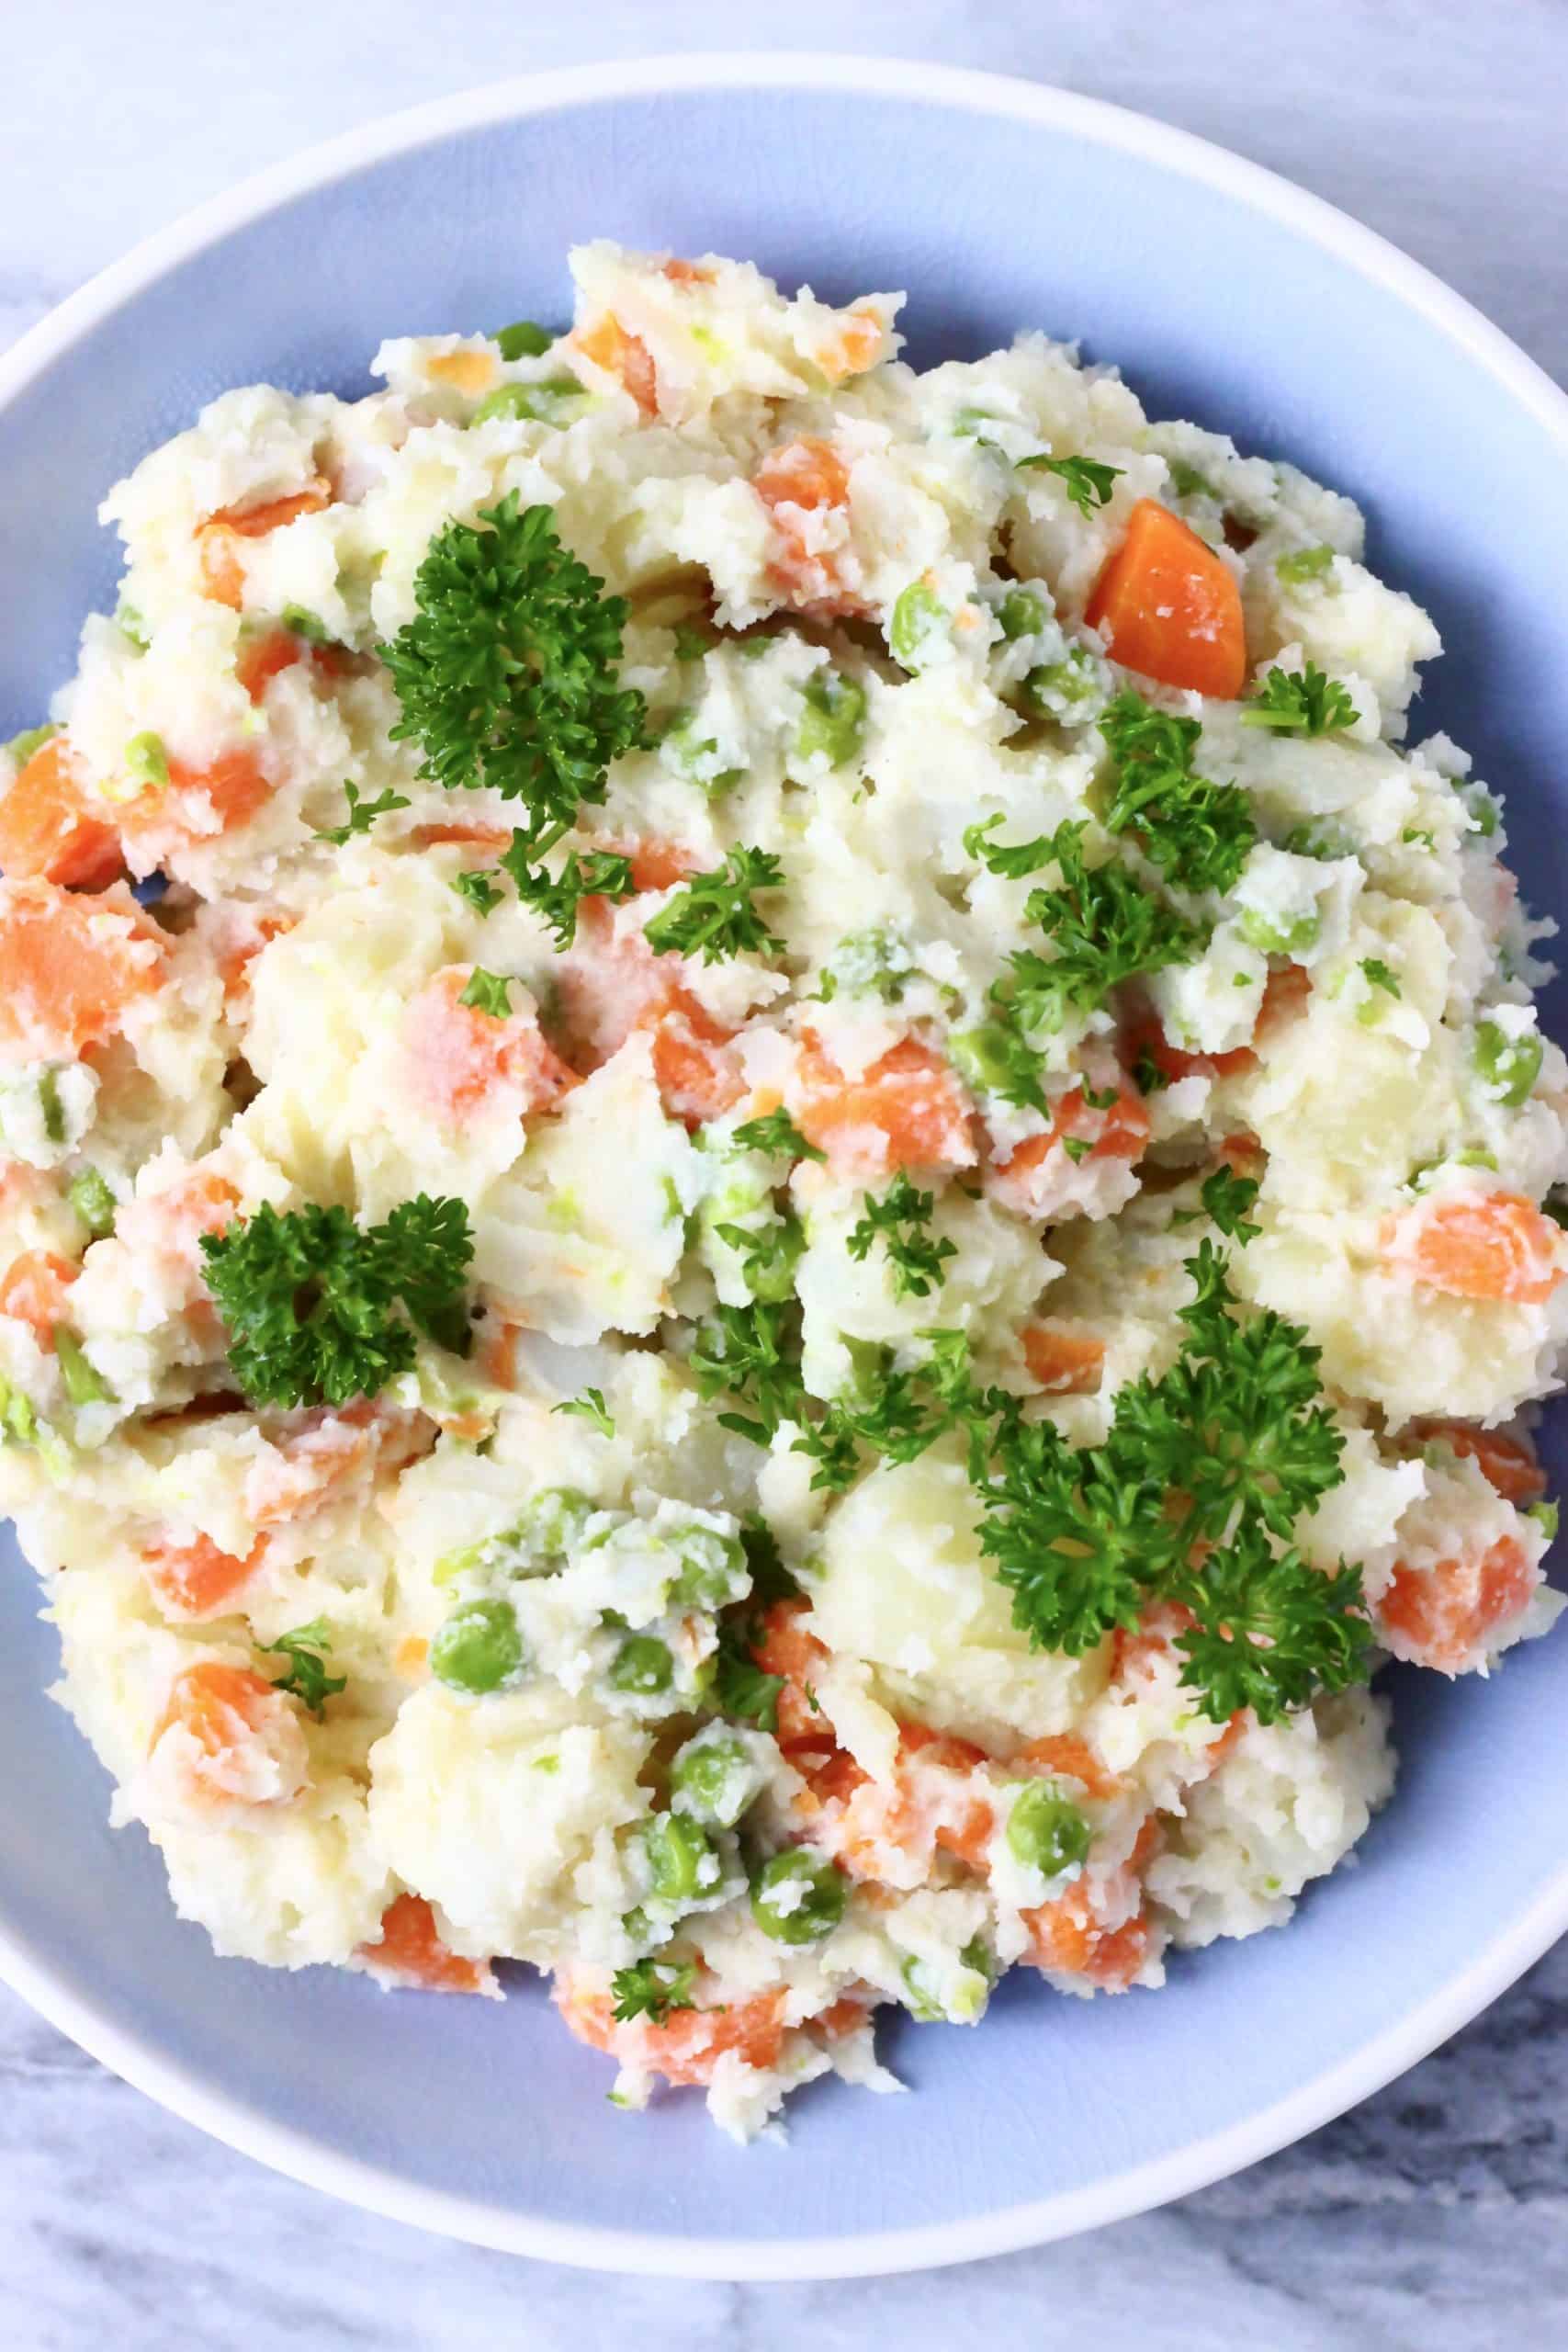 Vegan potato salad with peas and carrots in a blue bowl